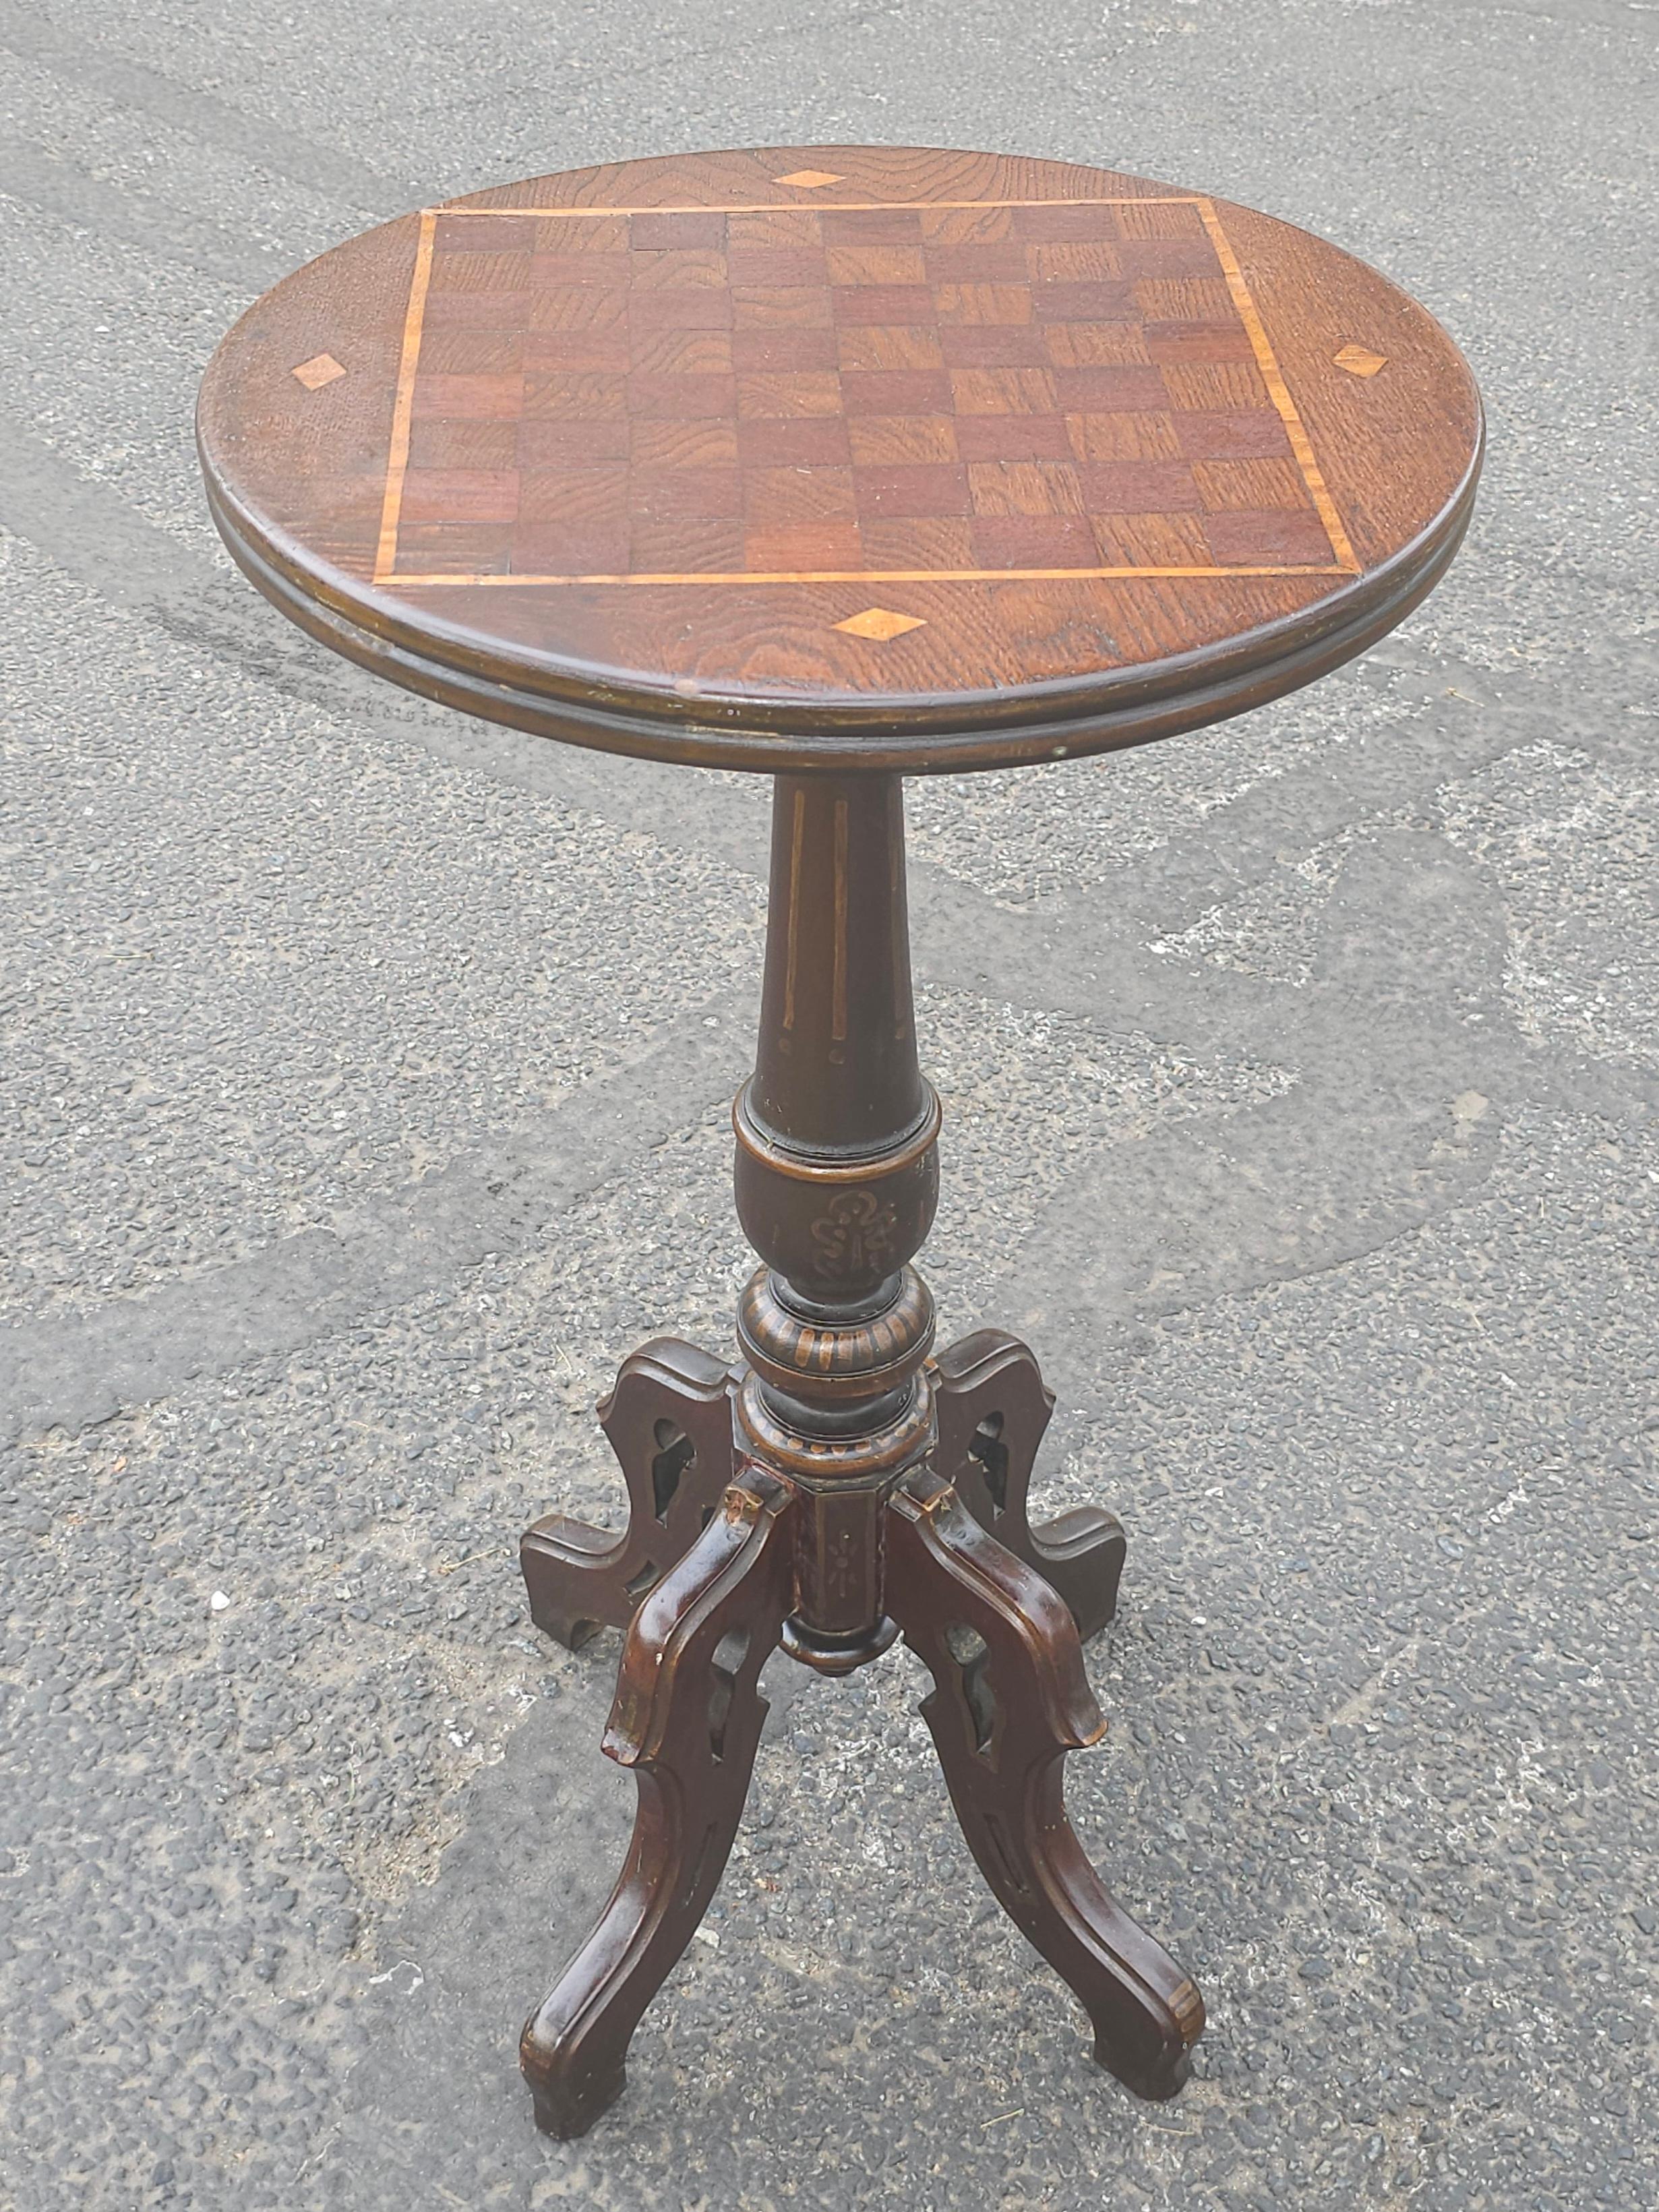 19th Century Victorian Oak & Mixed Wood Parquetry and Inlay Pedestal Game Table For Sale 4